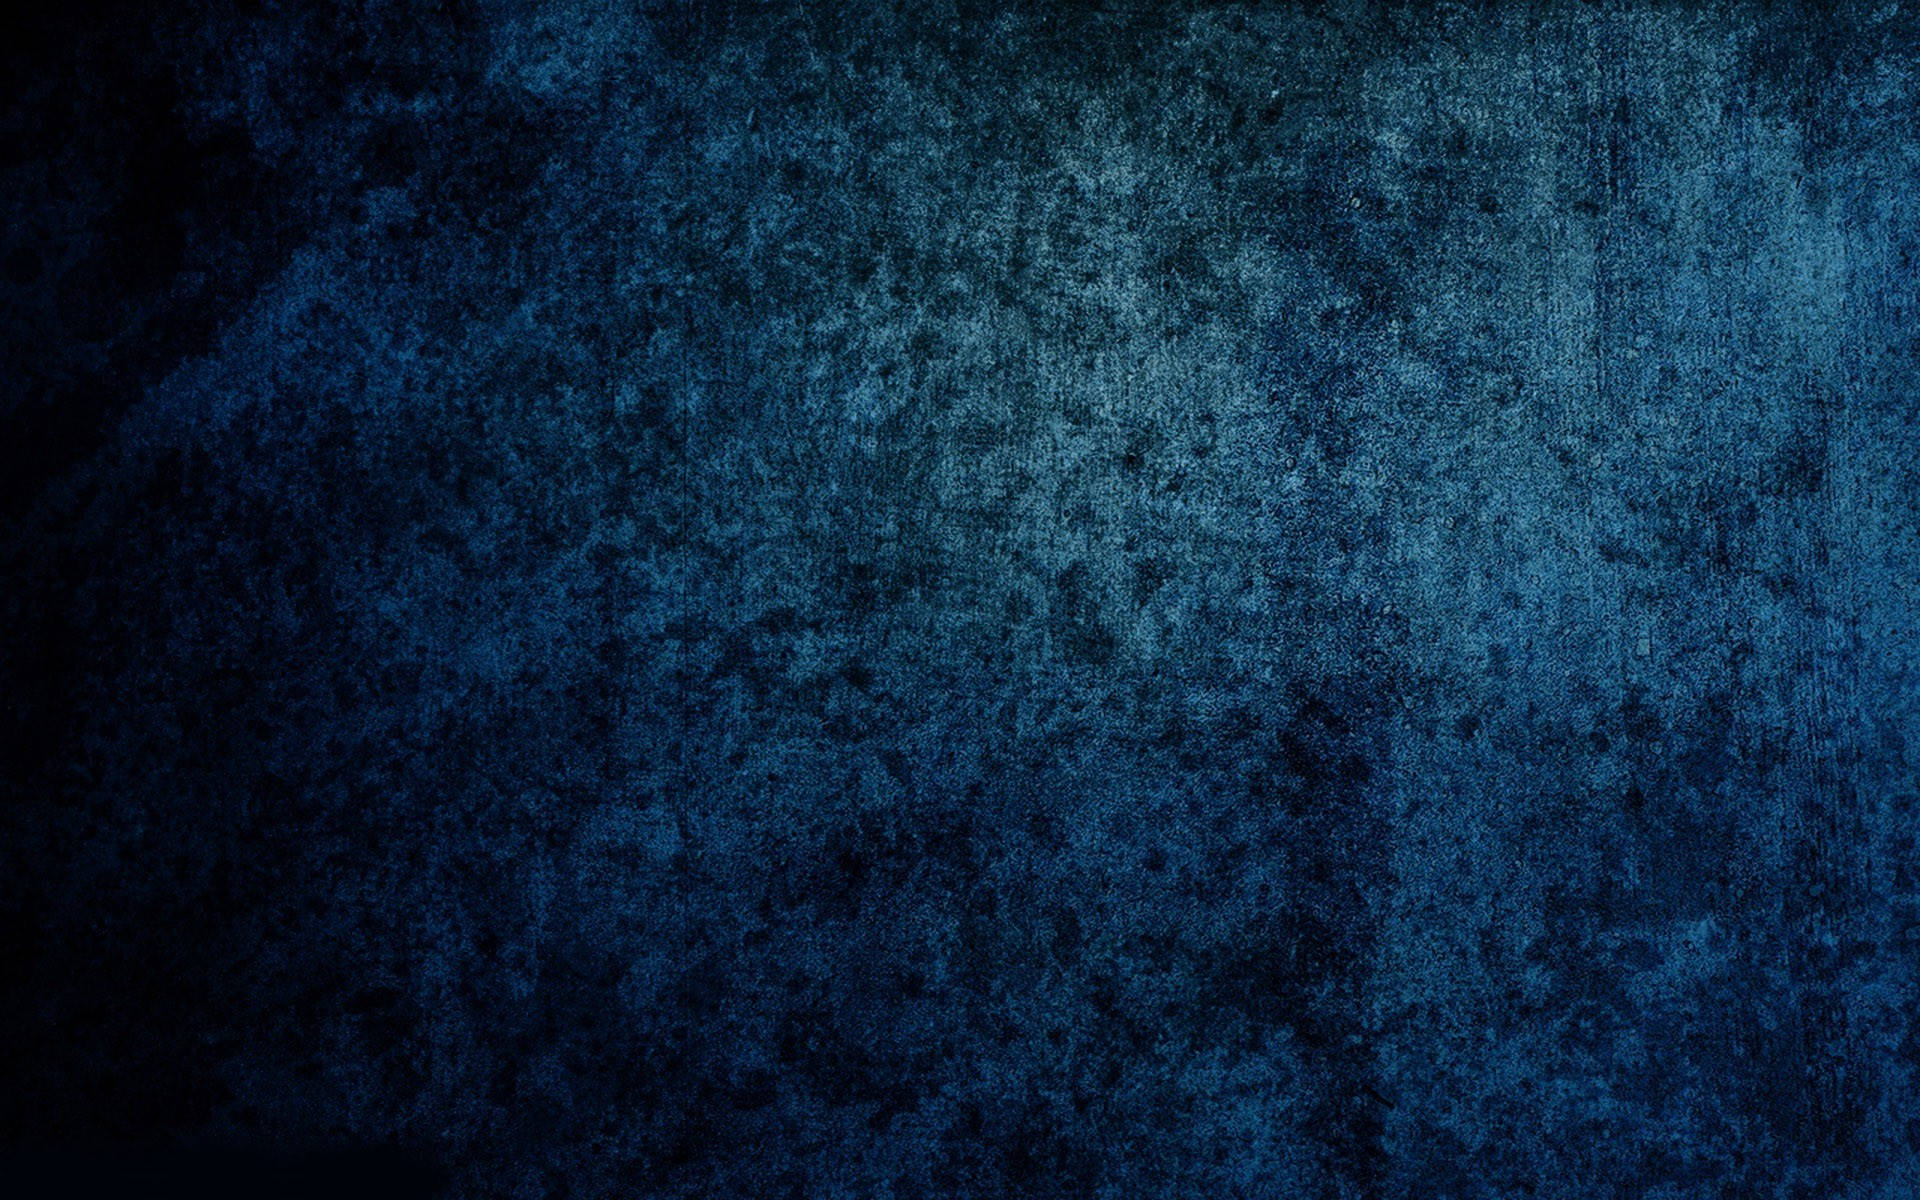 "A Close Up Of Blue And Green Grunge With Subtle Textures" Wallpaper